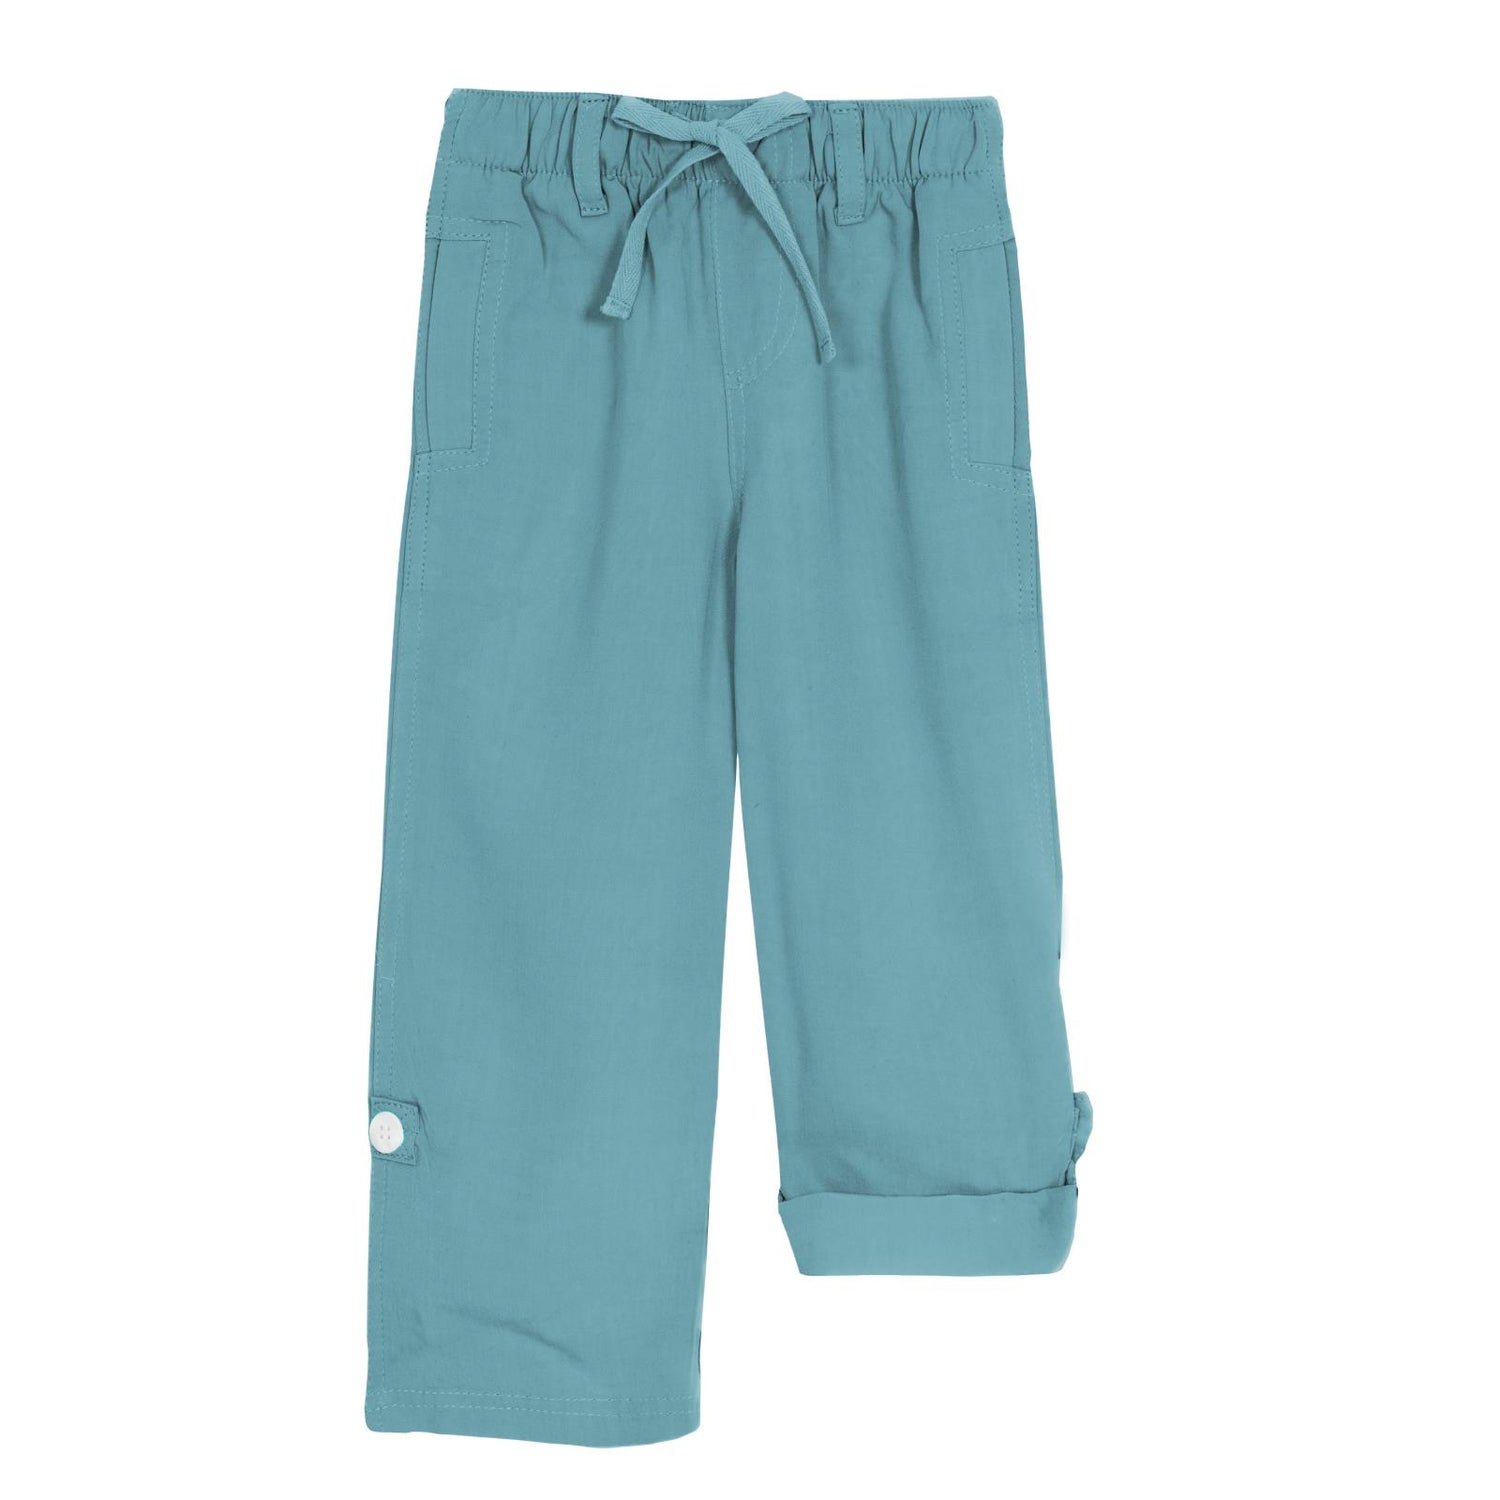 Woven Roll-Up Pants in Glacier